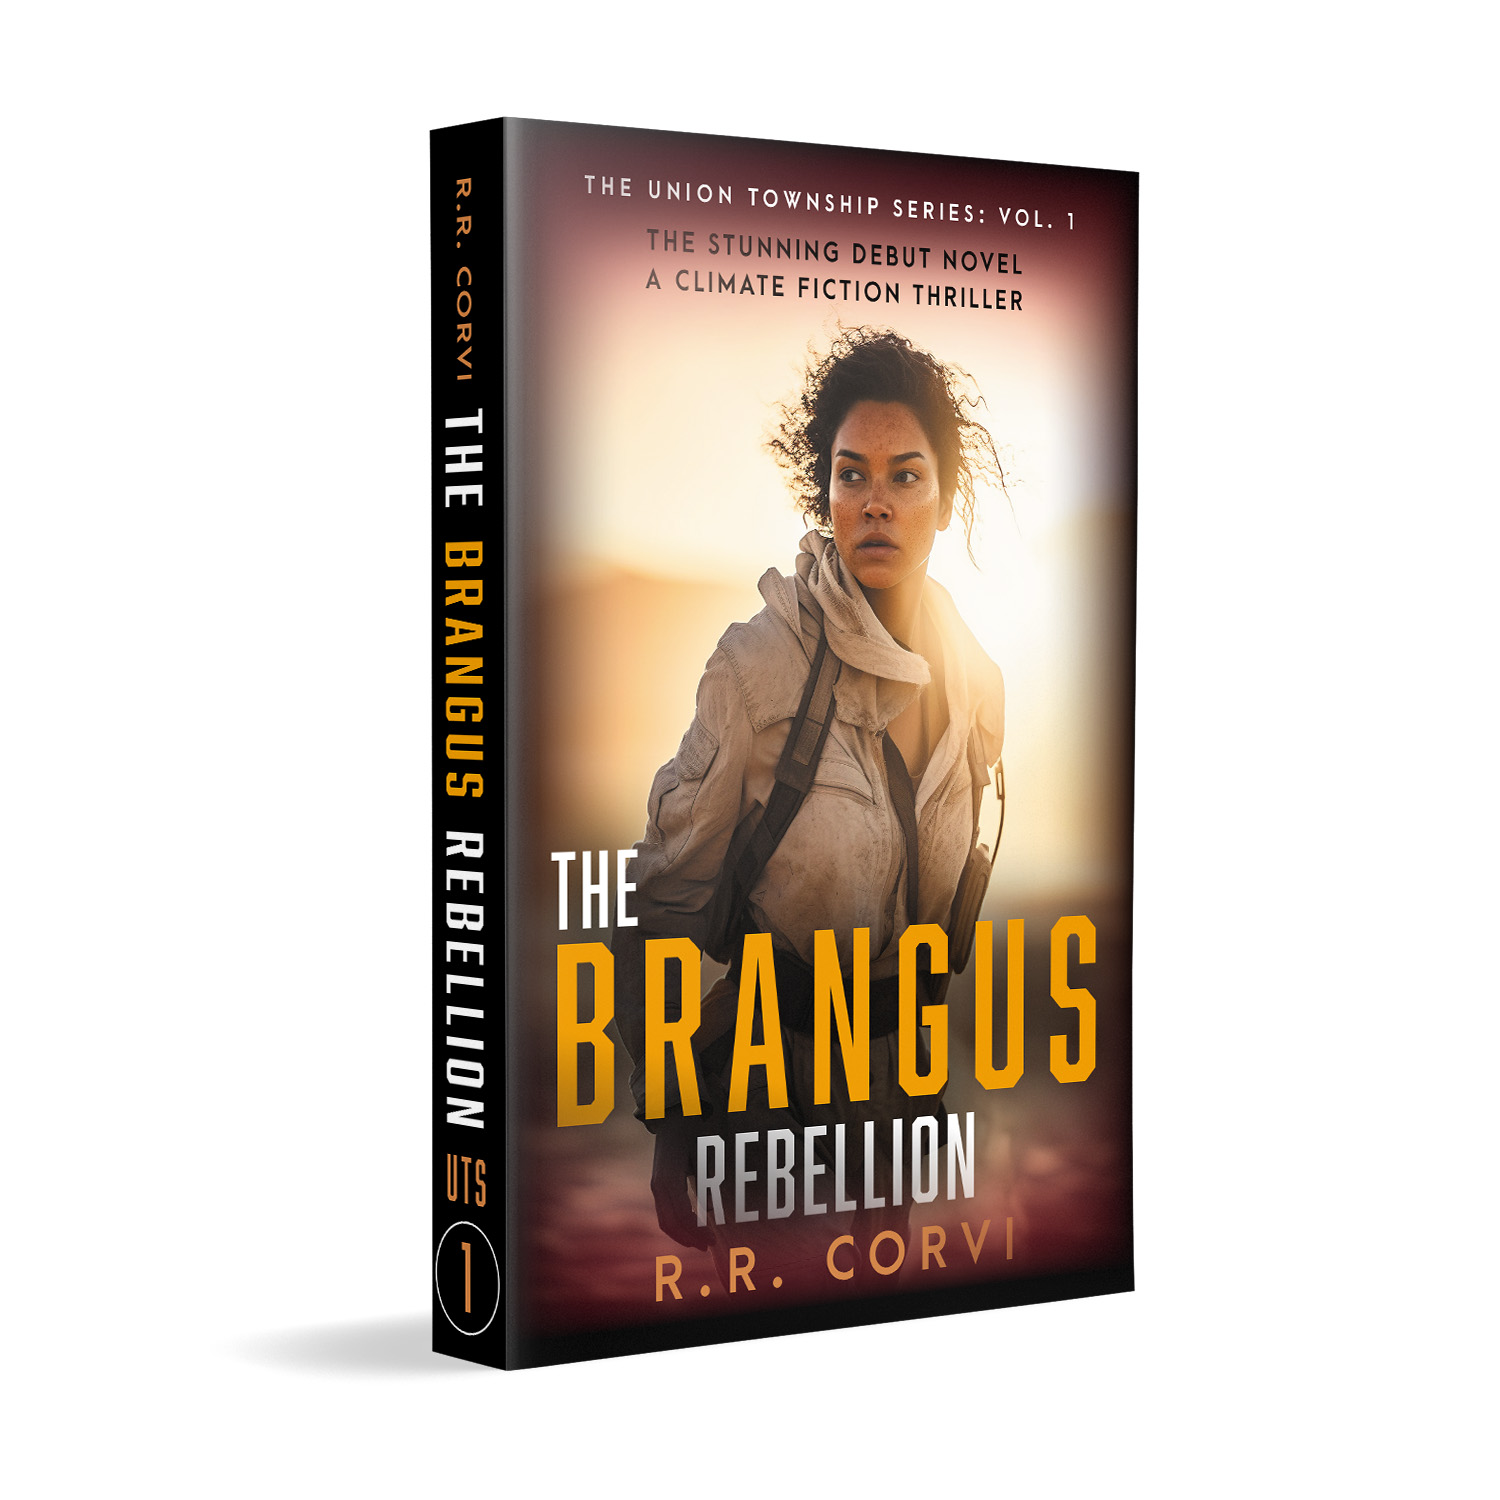 'The Brangus Rebellion'' is the first instalment in a dystopian scifi series. The author is R R Corvi. The cover design and interior formatting are by Mark Thomas of coverness.com. To find out more about my book design services, please visit www.coverness.com.